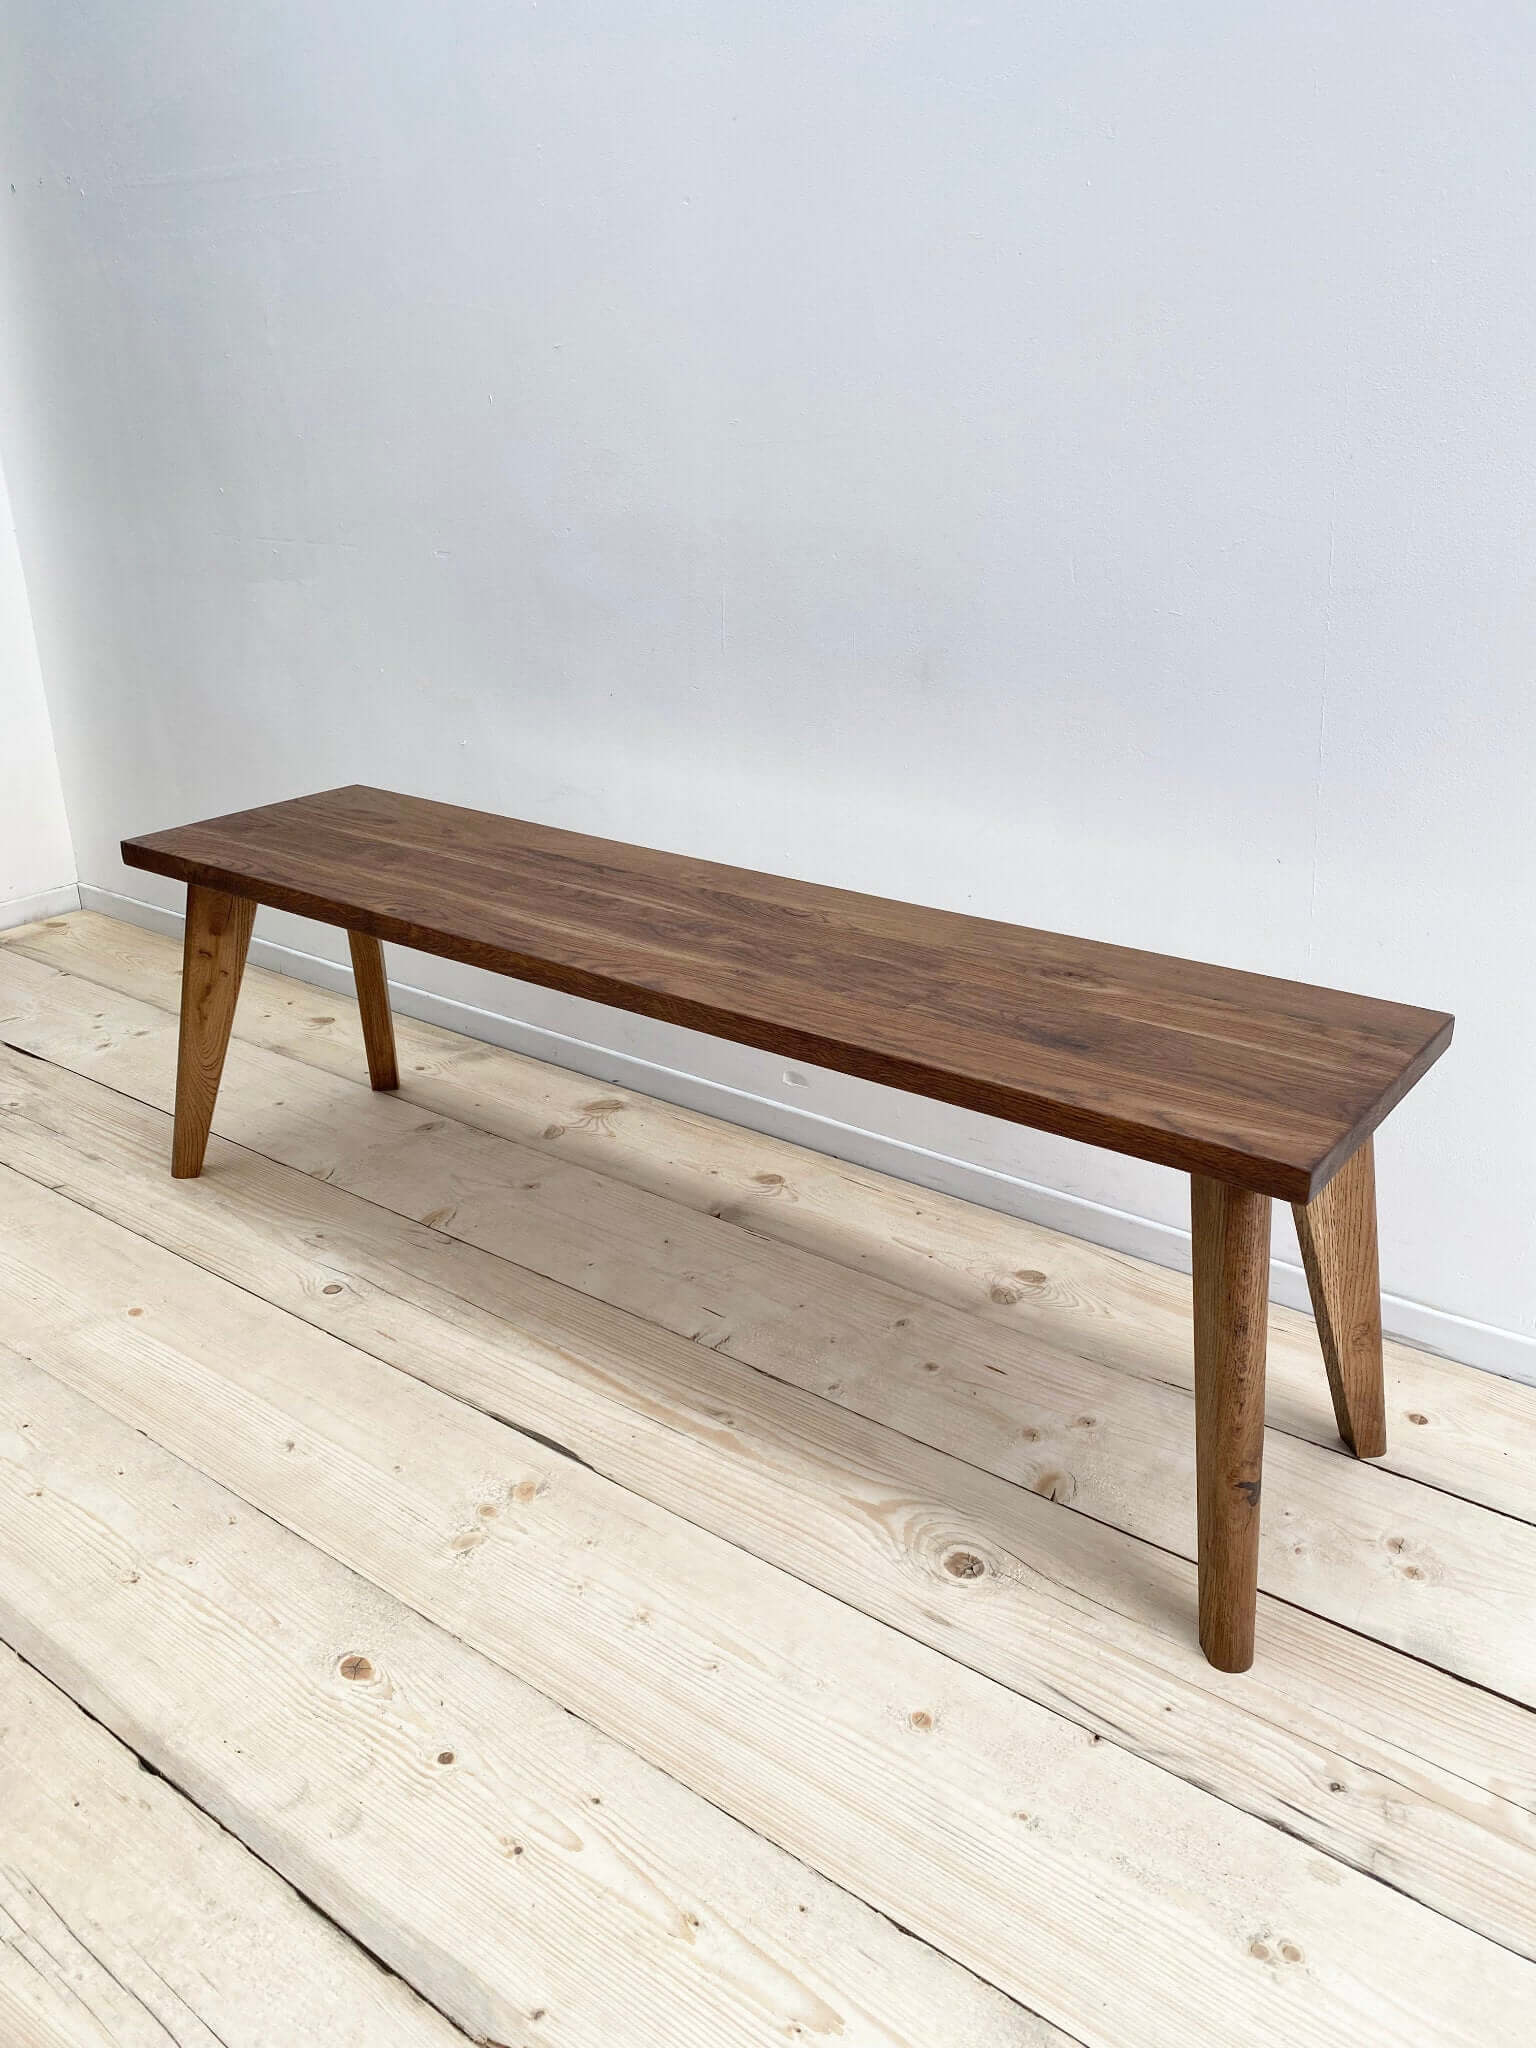 Hardwood bench seat with solid wood legs.